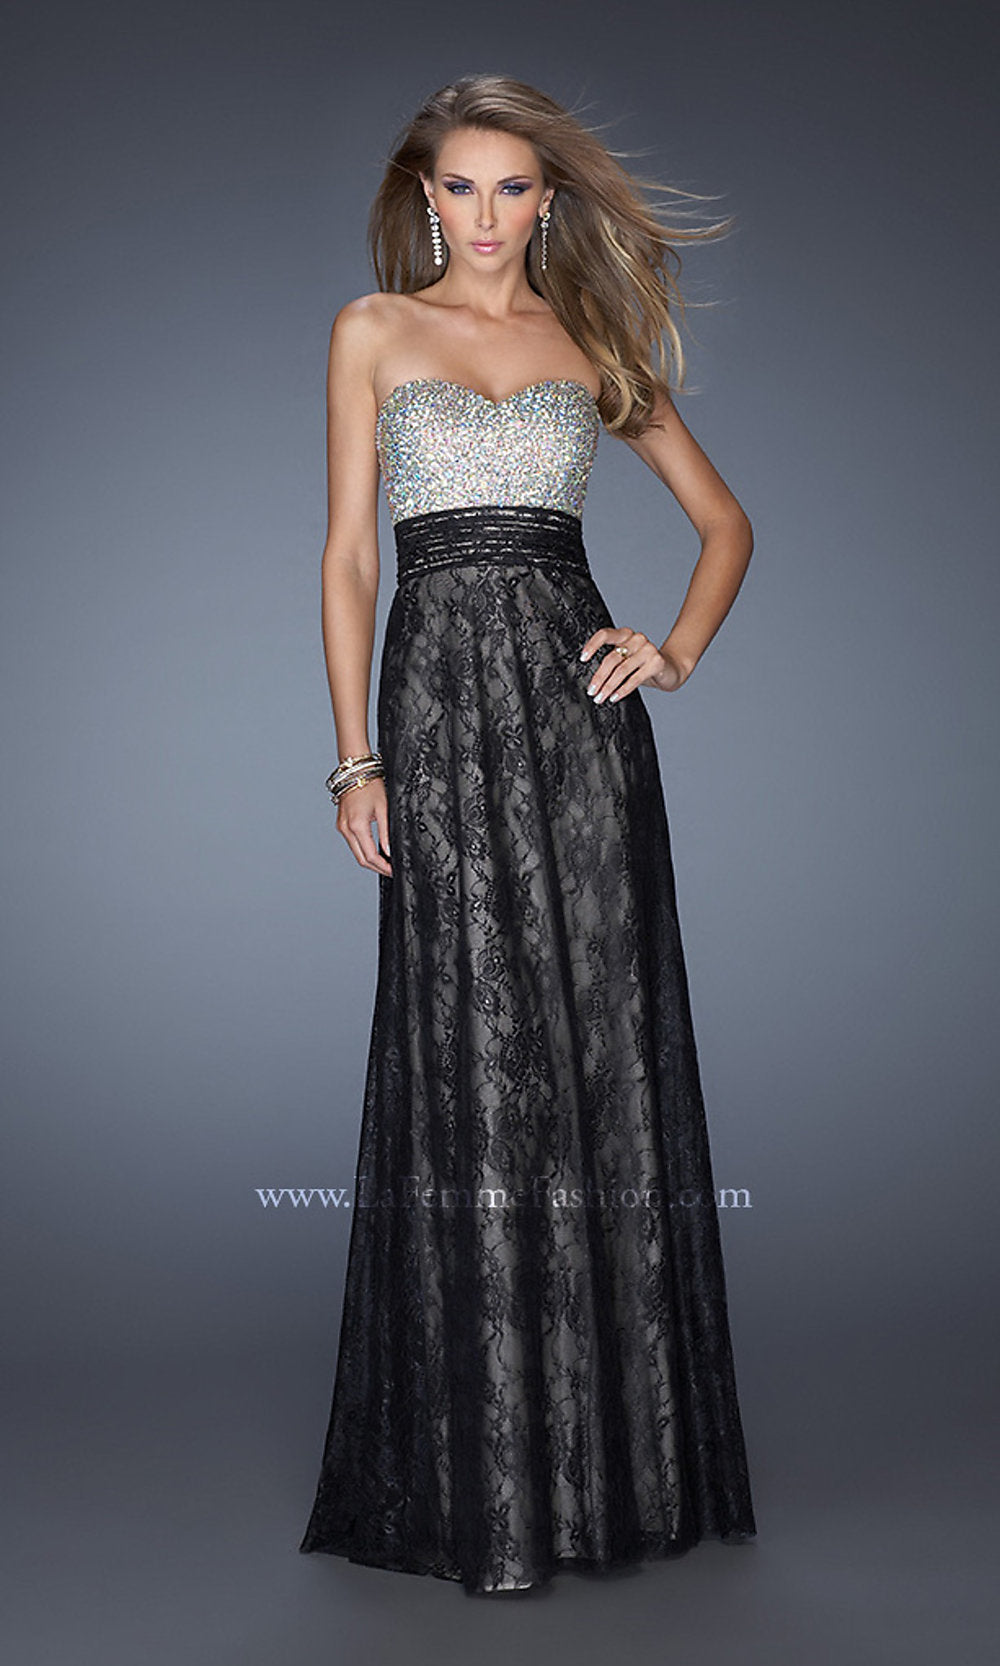 Black Full Length Sweetheart Open Back Lace Gown